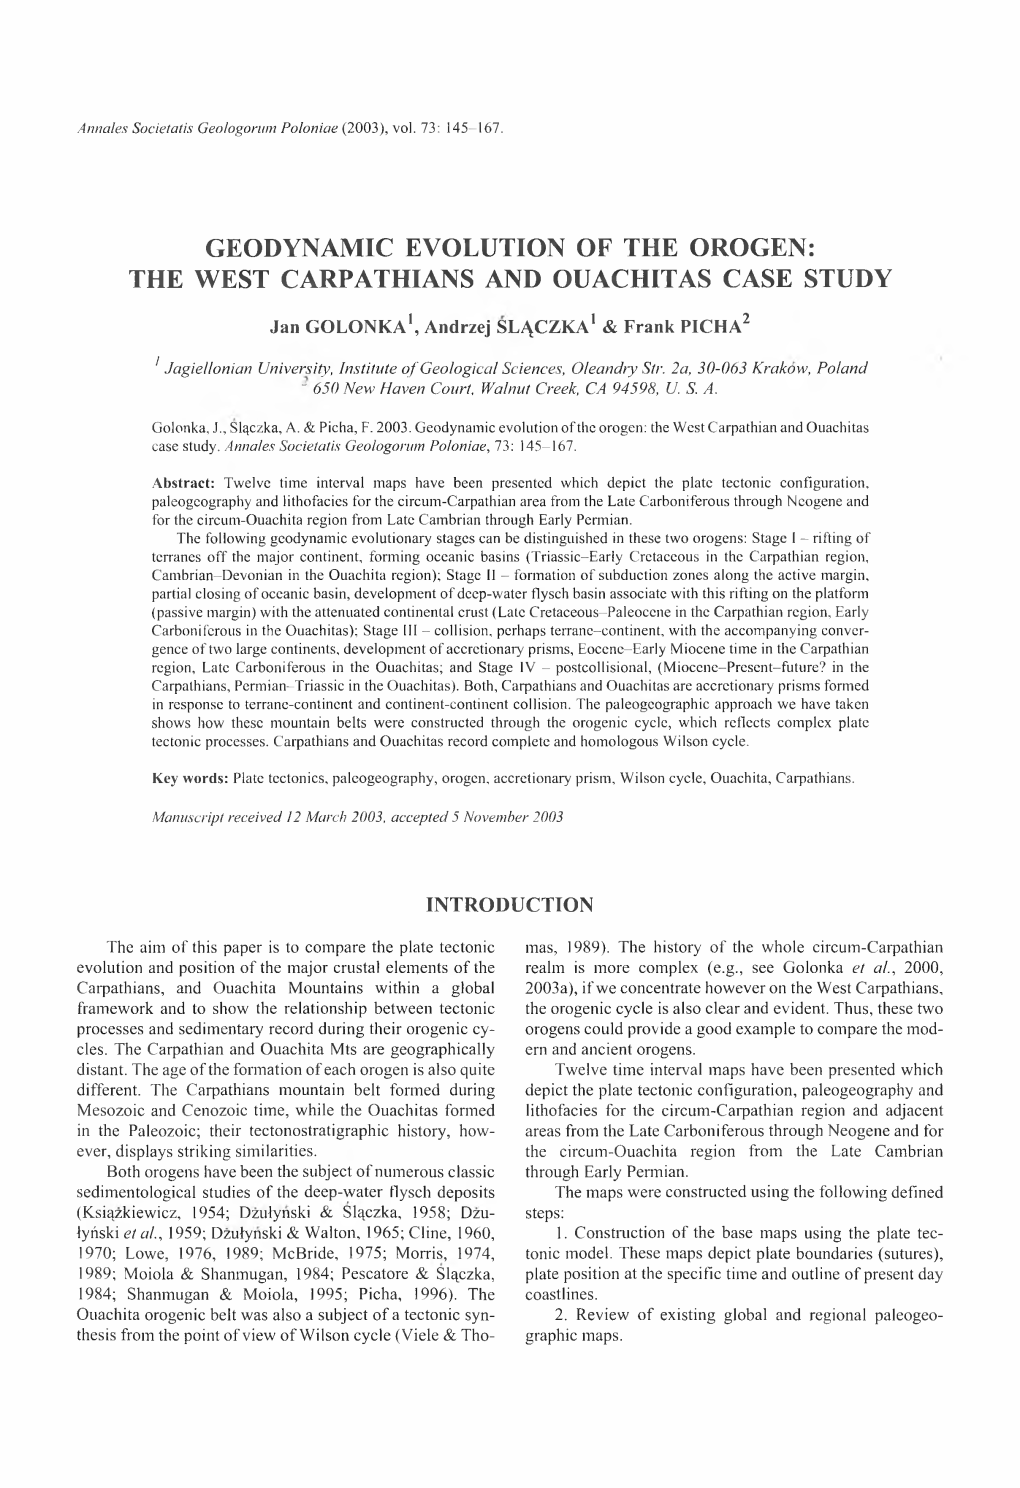 Geodynamic Evolution of the Orogen: the West Carpathians and Ouachitas Case Study